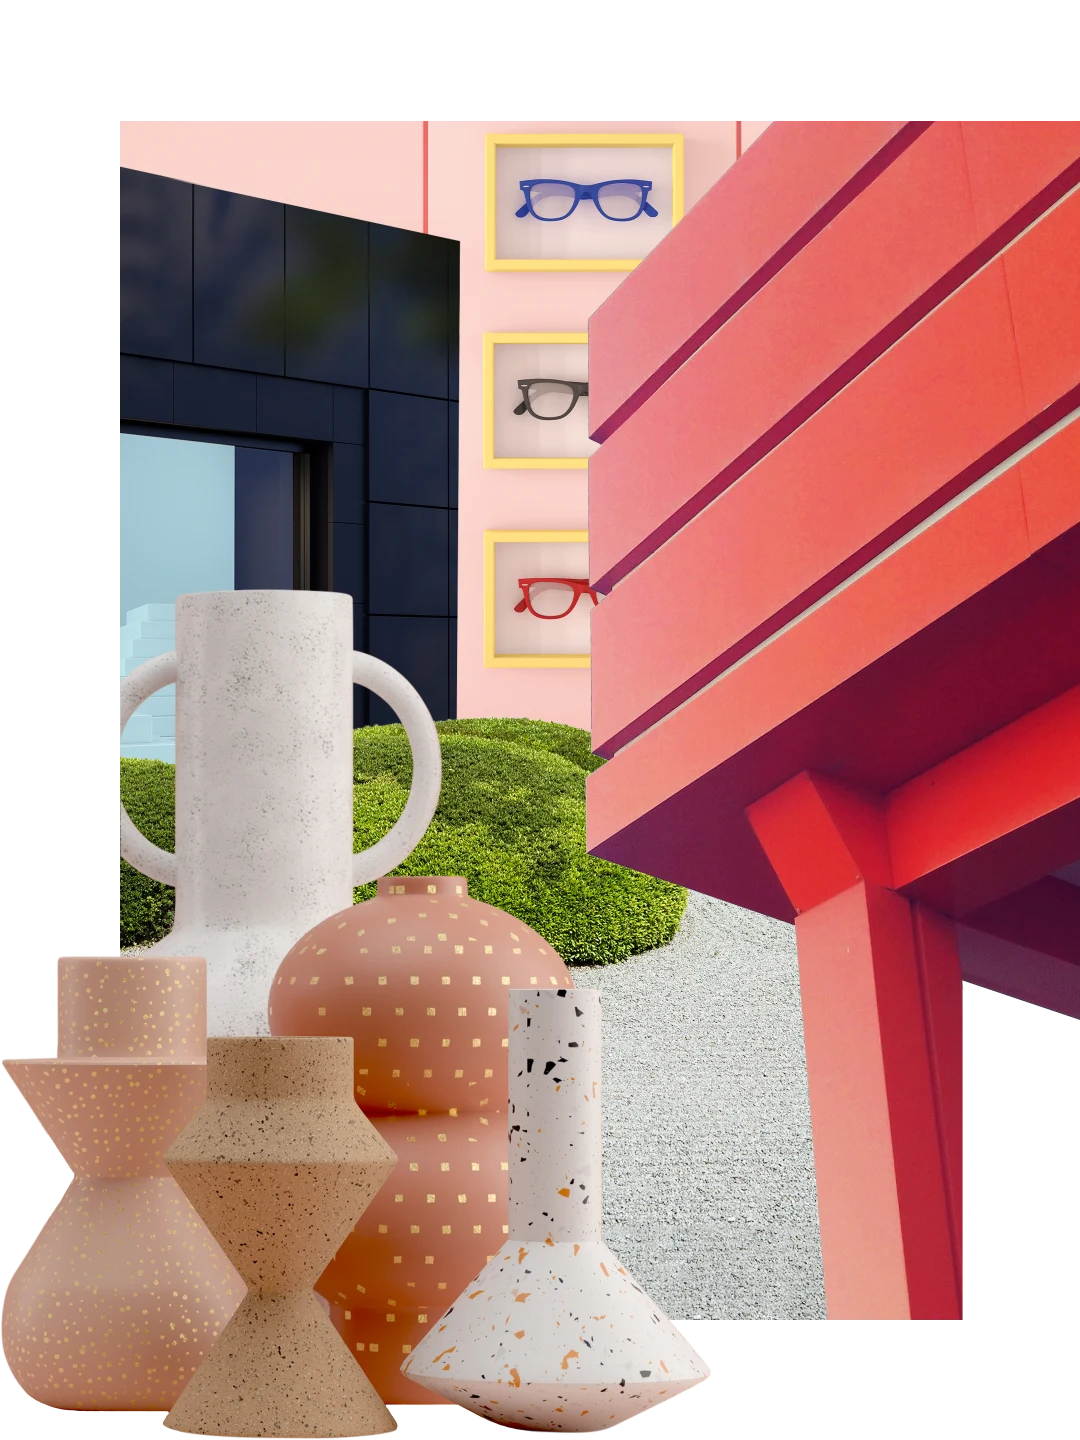 Collage of store-related items. Angular black store front in the back left. Bright red angular balcony at right. Wall of glasses in yellow picture frames in back. Rounded and angular vases at left, rounded green bushes behind them.
